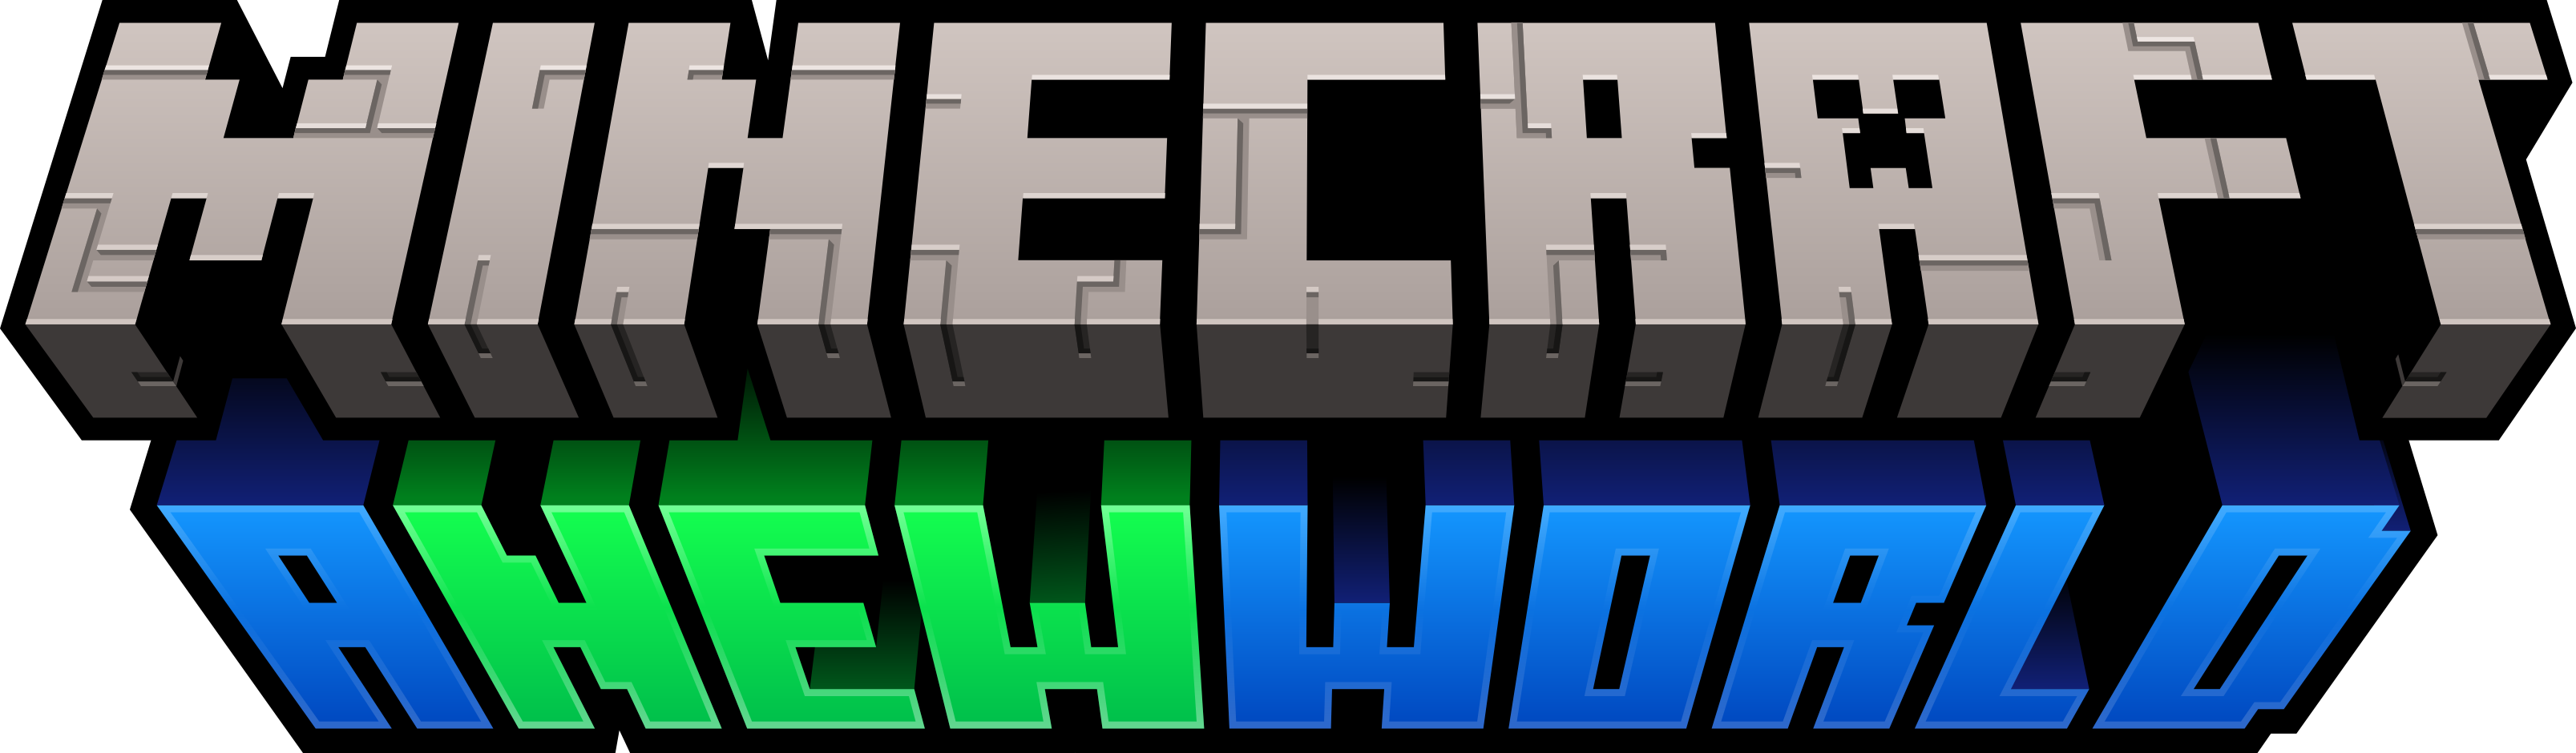 Minecraft Earth is available in the US for fans hoping to play the